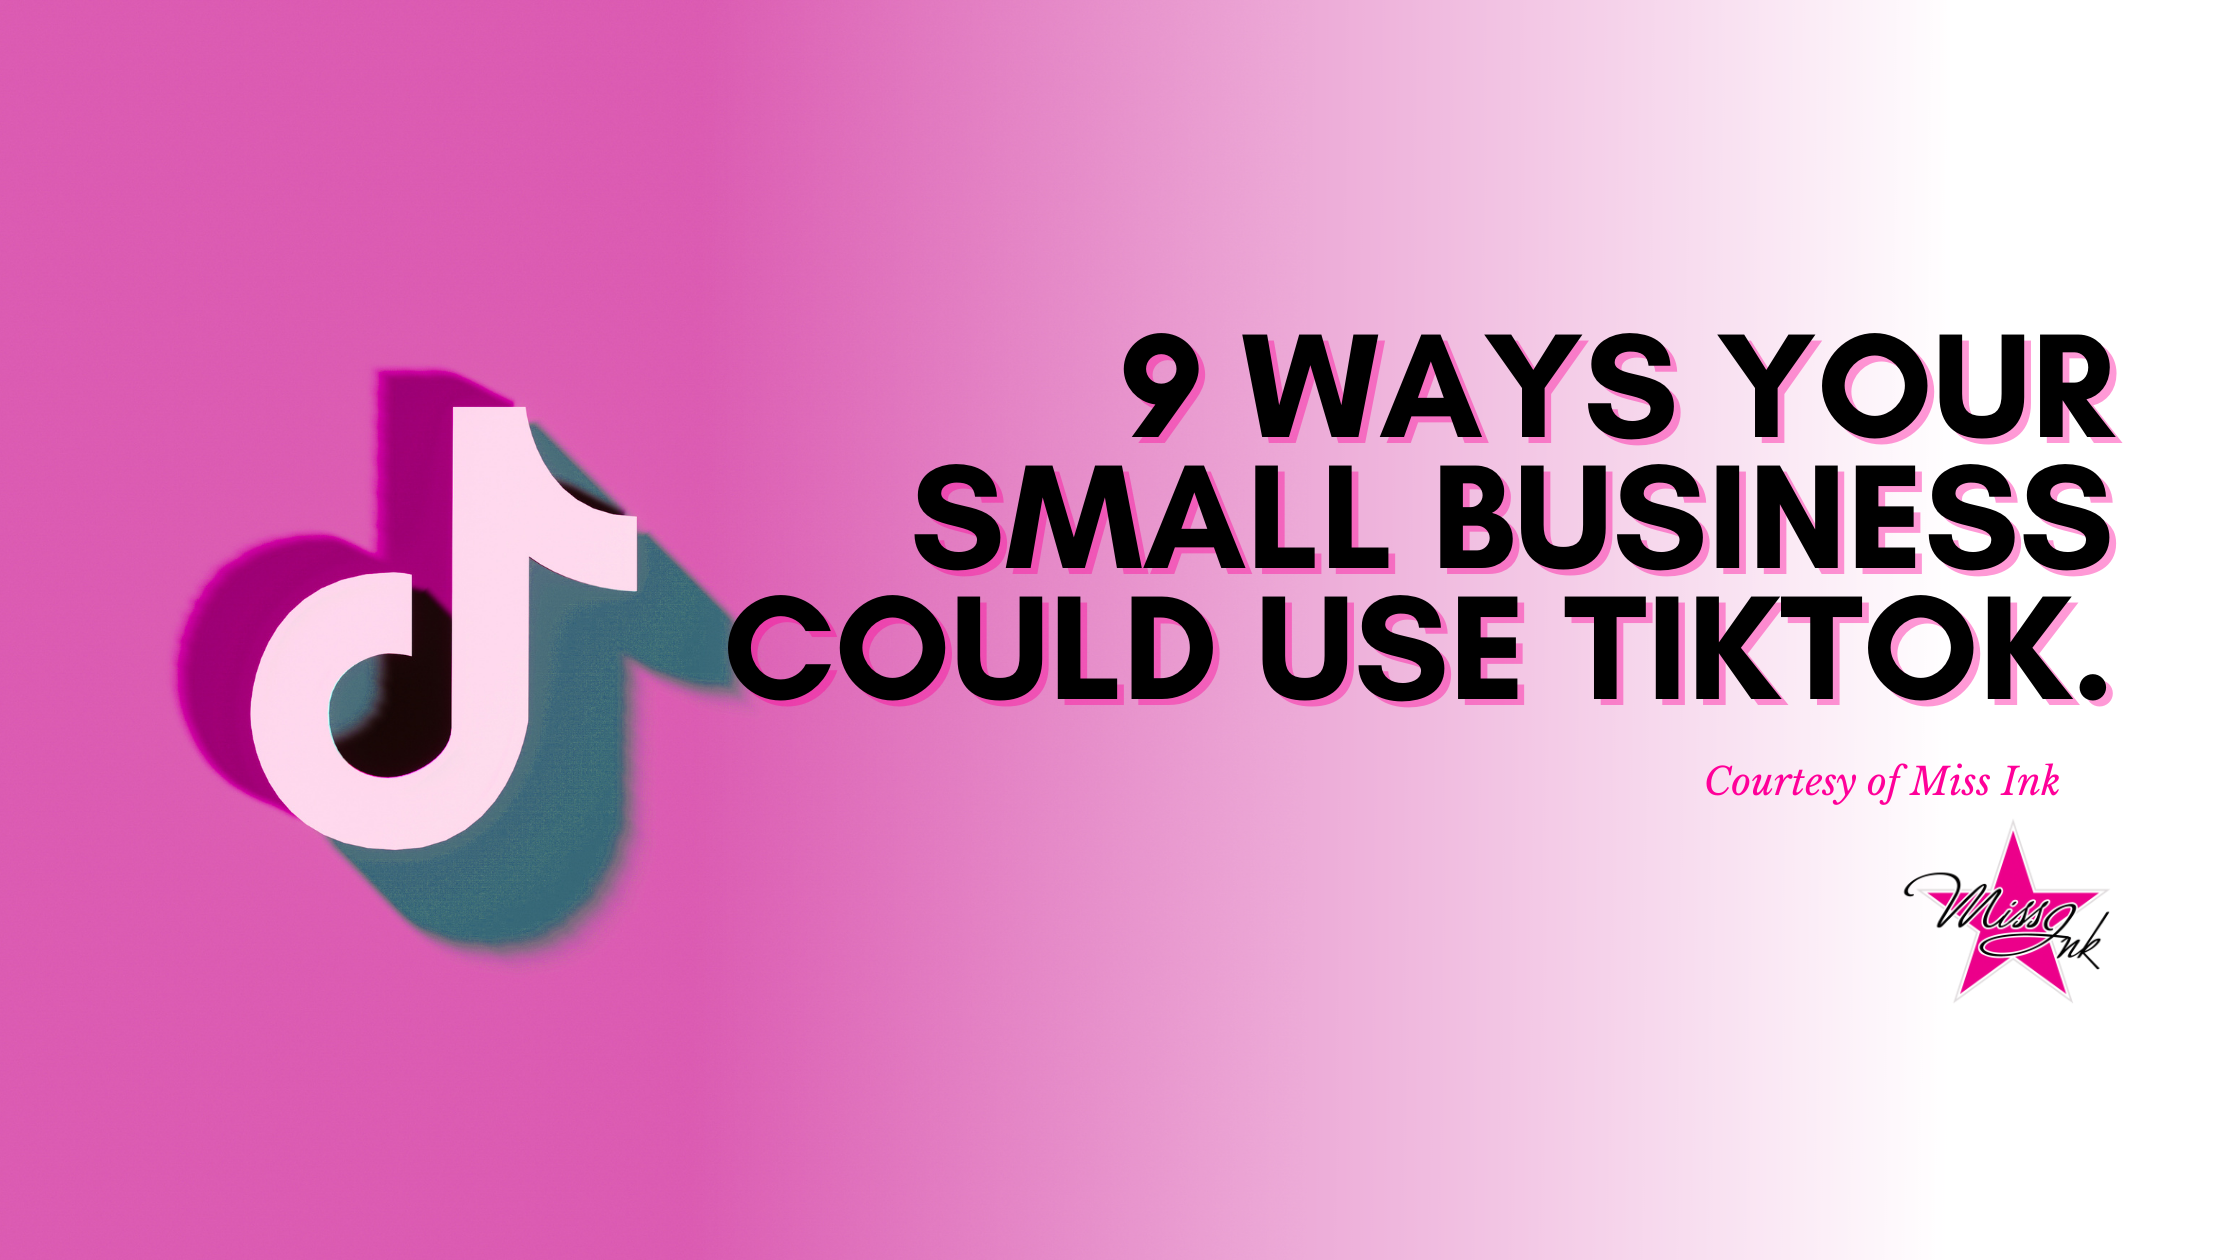 9 Ways Your Small Business Could Use TikTok.